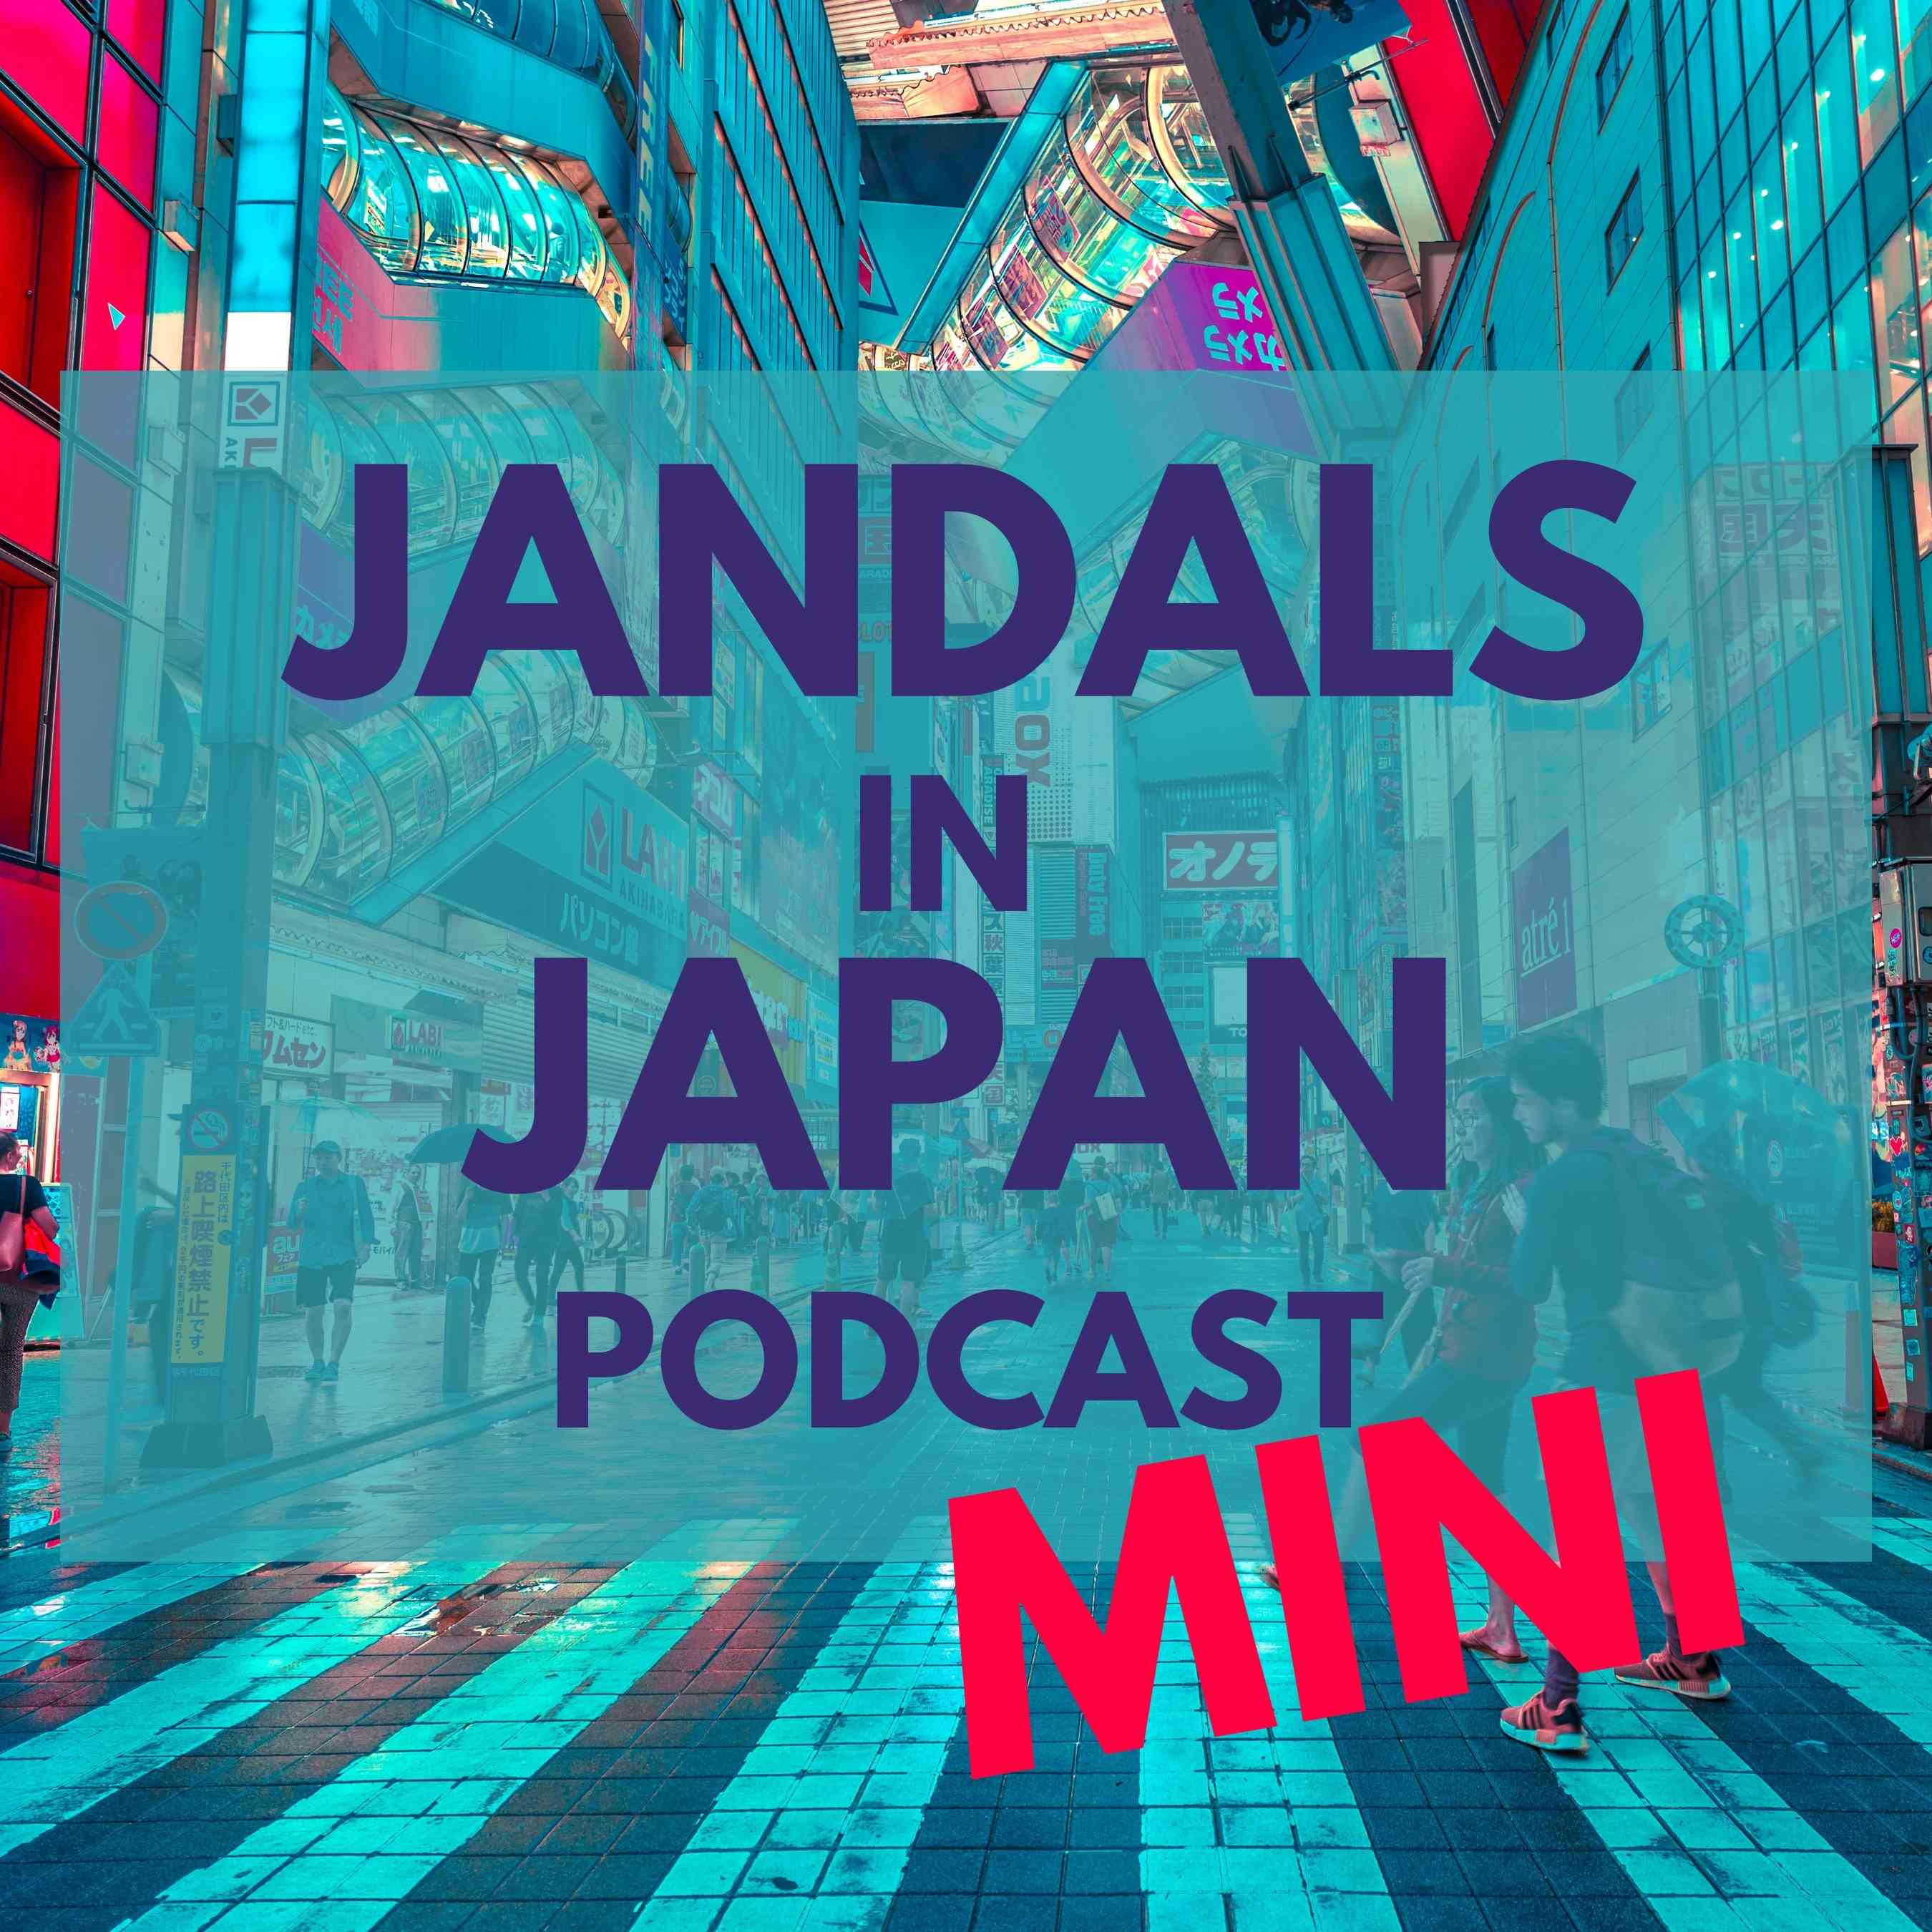 Artwork for podcast Jandals in Japan